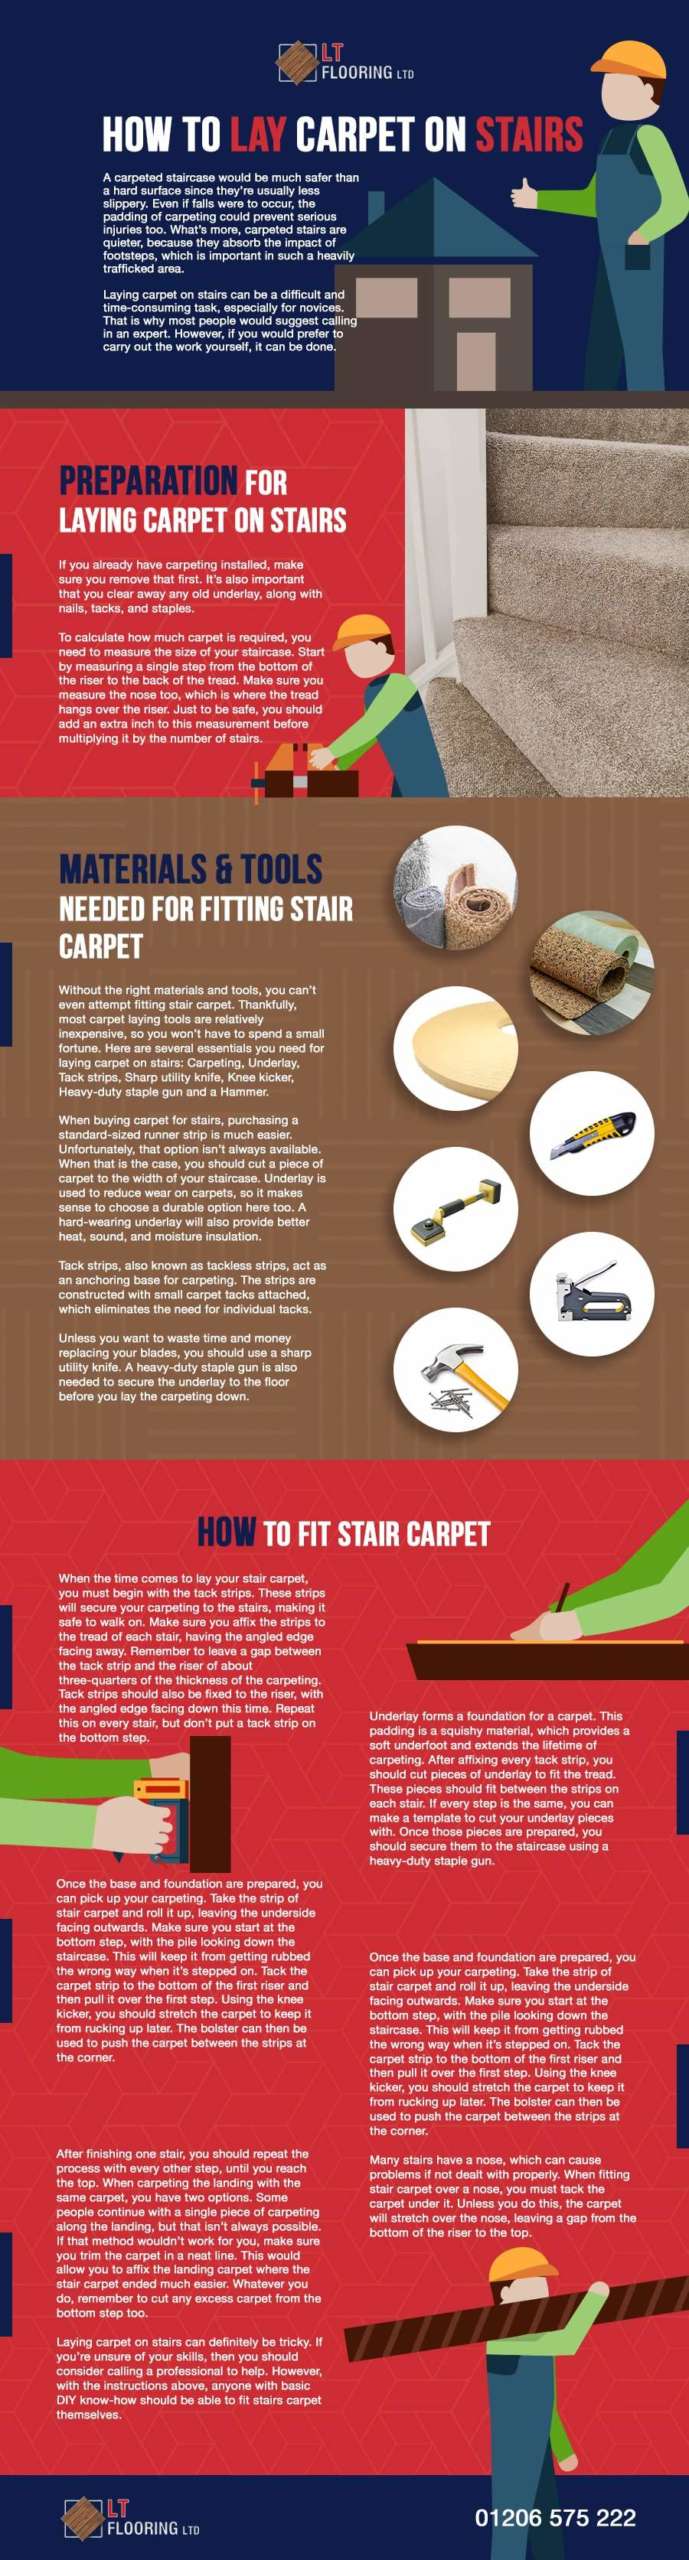 How to Lay Carpet on Stairs